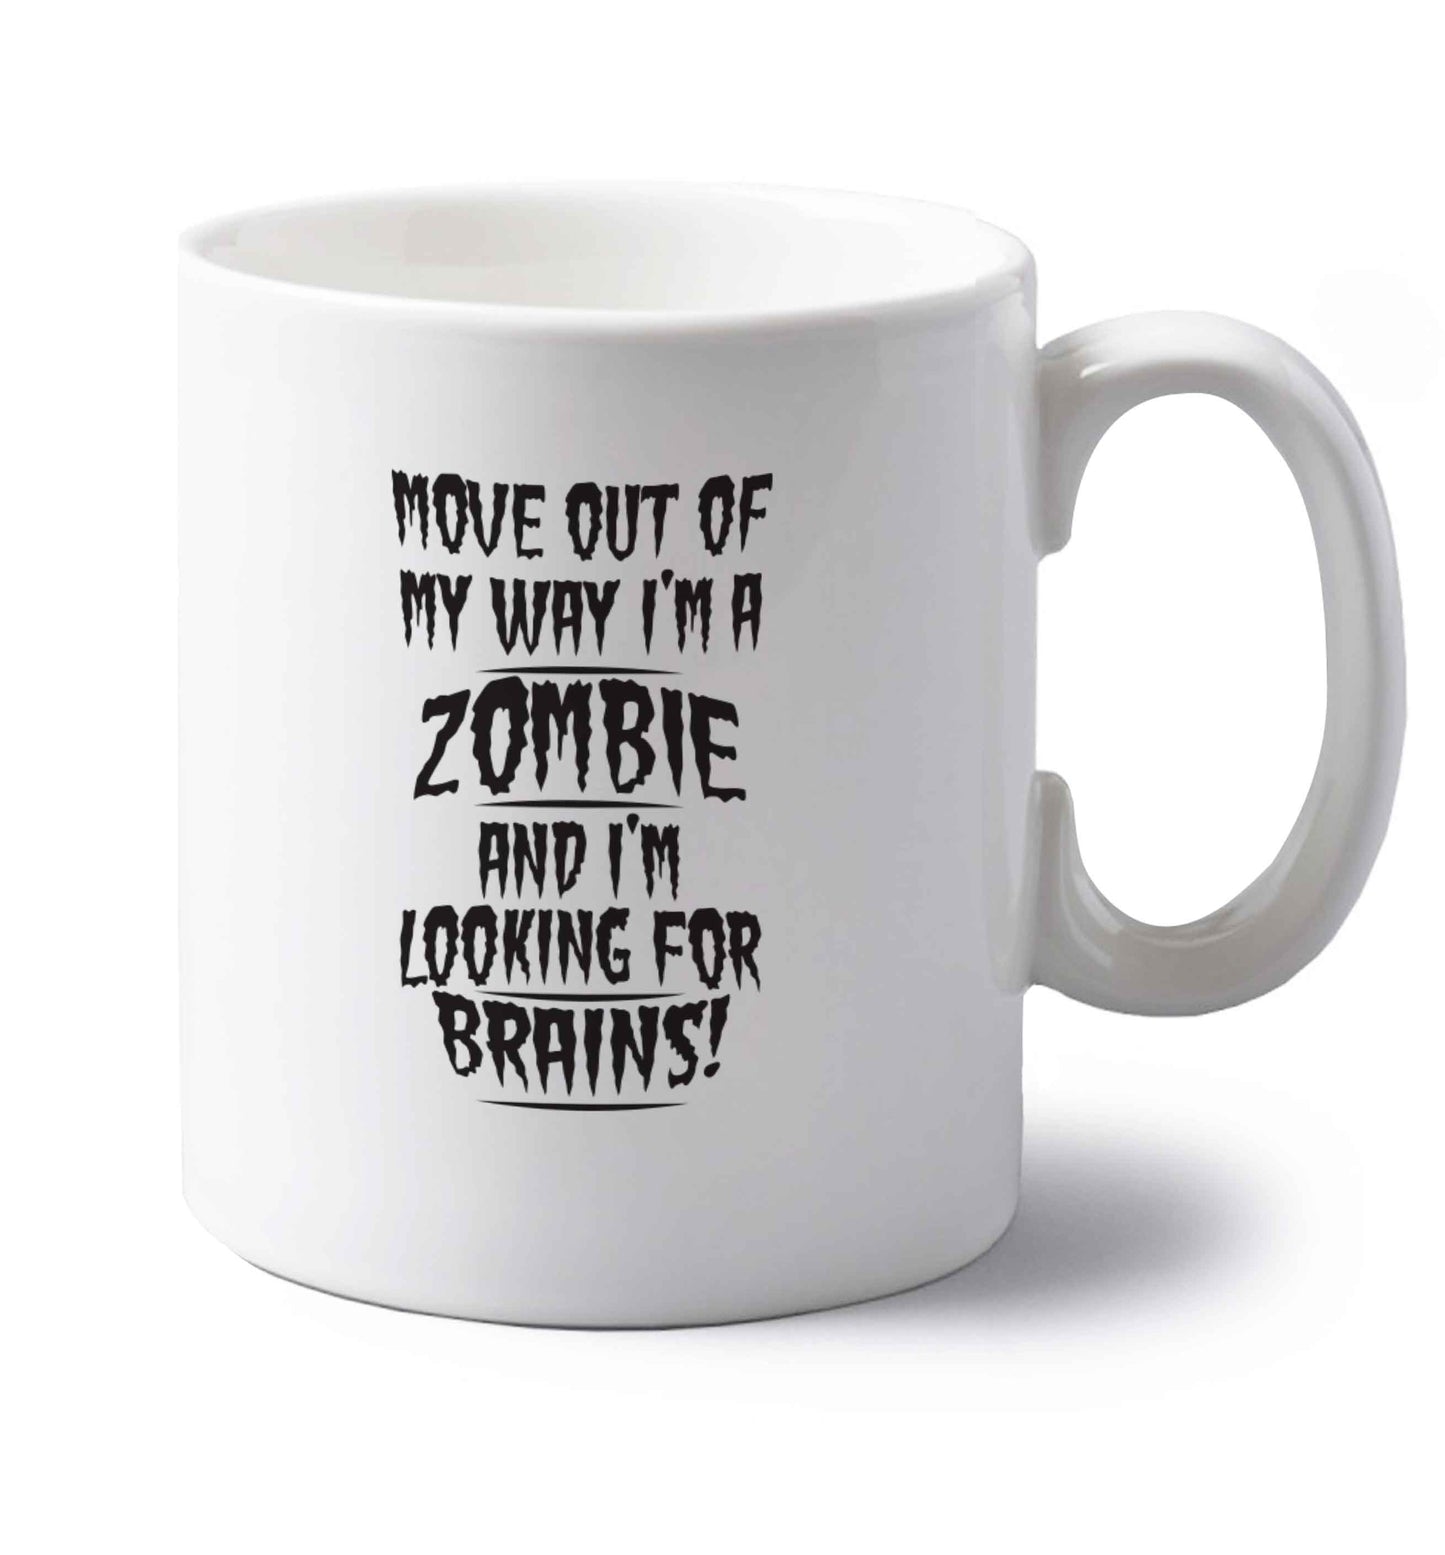 I'm a zombie and I'm looking for brains! left handed white ceramic mug 